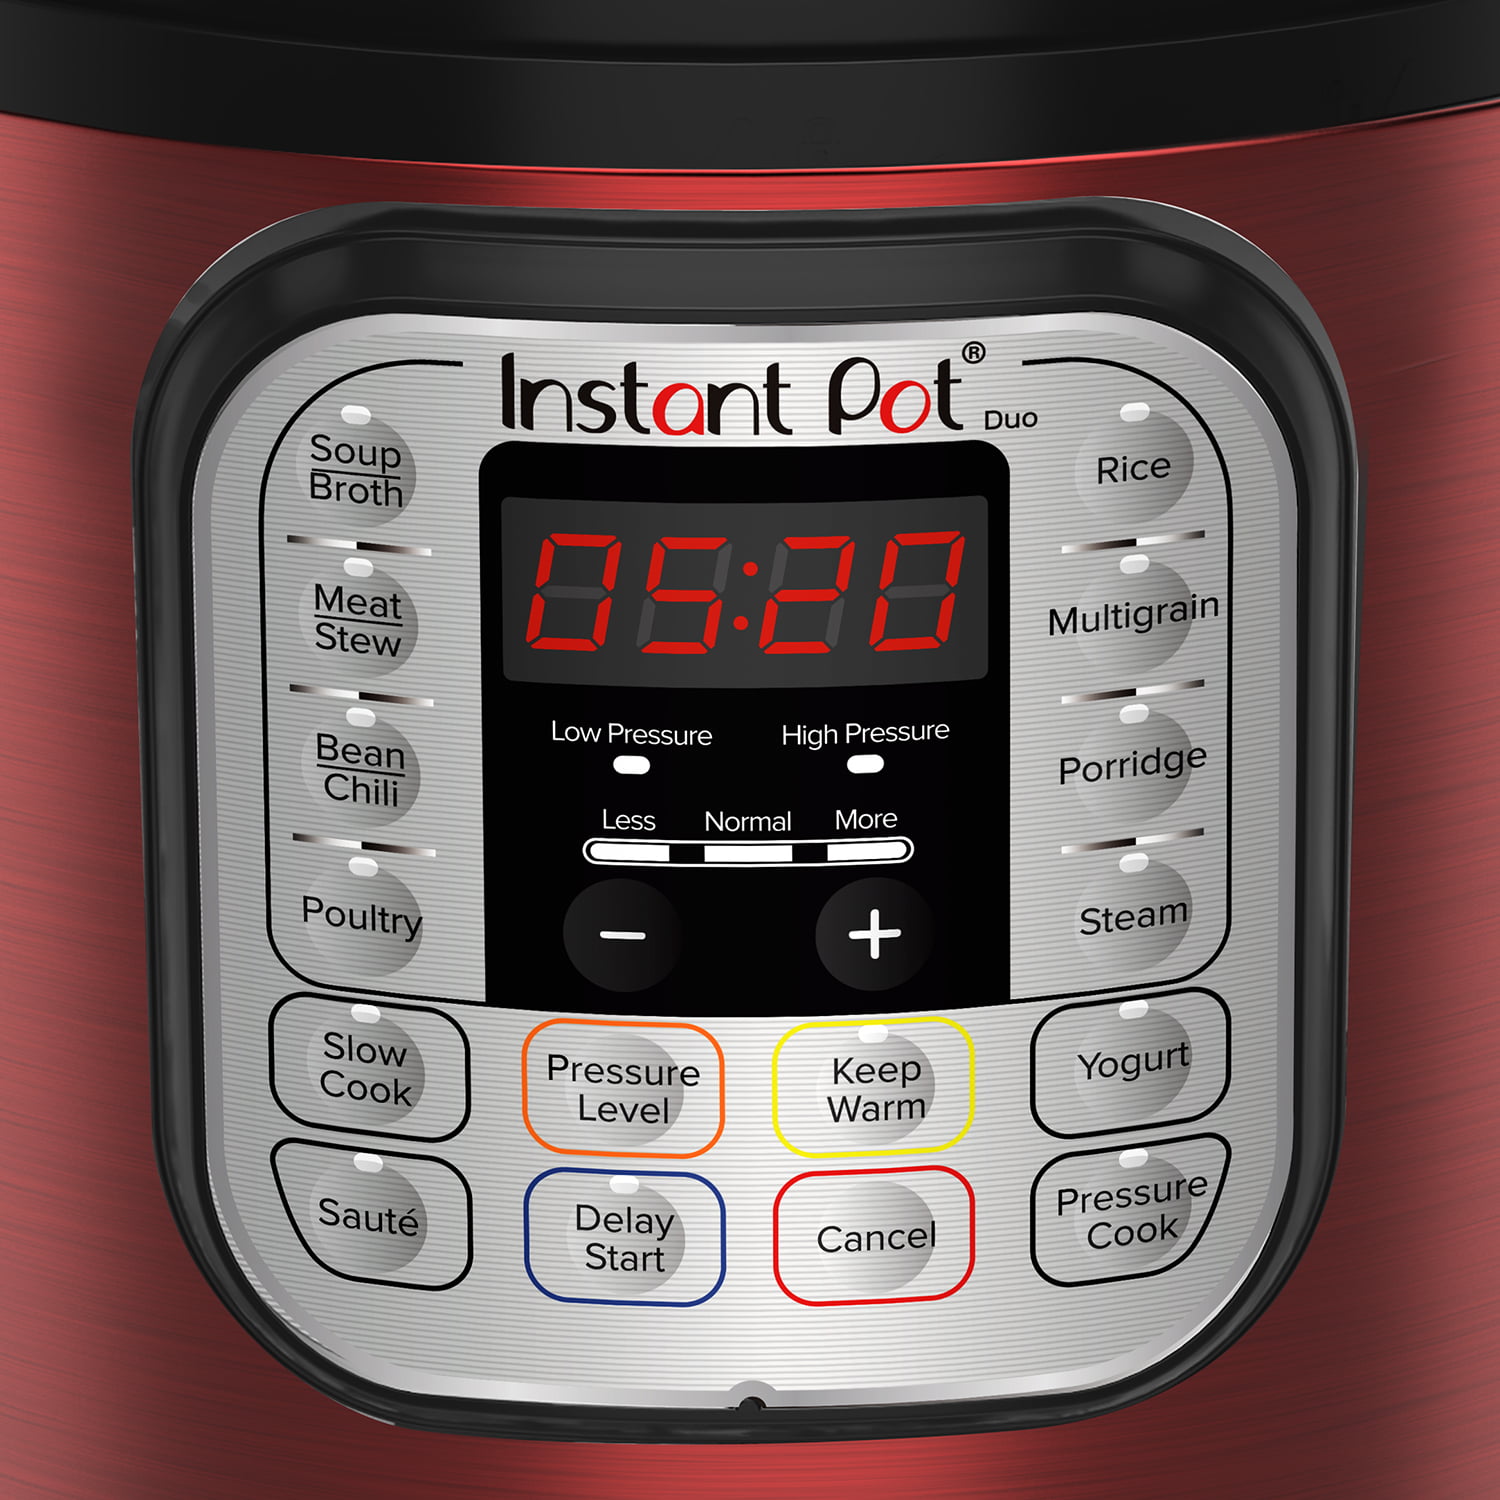  Instant Pot RIO, 7-in-1 Electric Multi-Cooker, Pressure Cooker,  Slow Cooker, Rice Cooker, Steamer, Sauté, Yogurt Maker, & Warmer, Includes  App With Over 800 Recipes, 6 Quart: Home & Kitchen